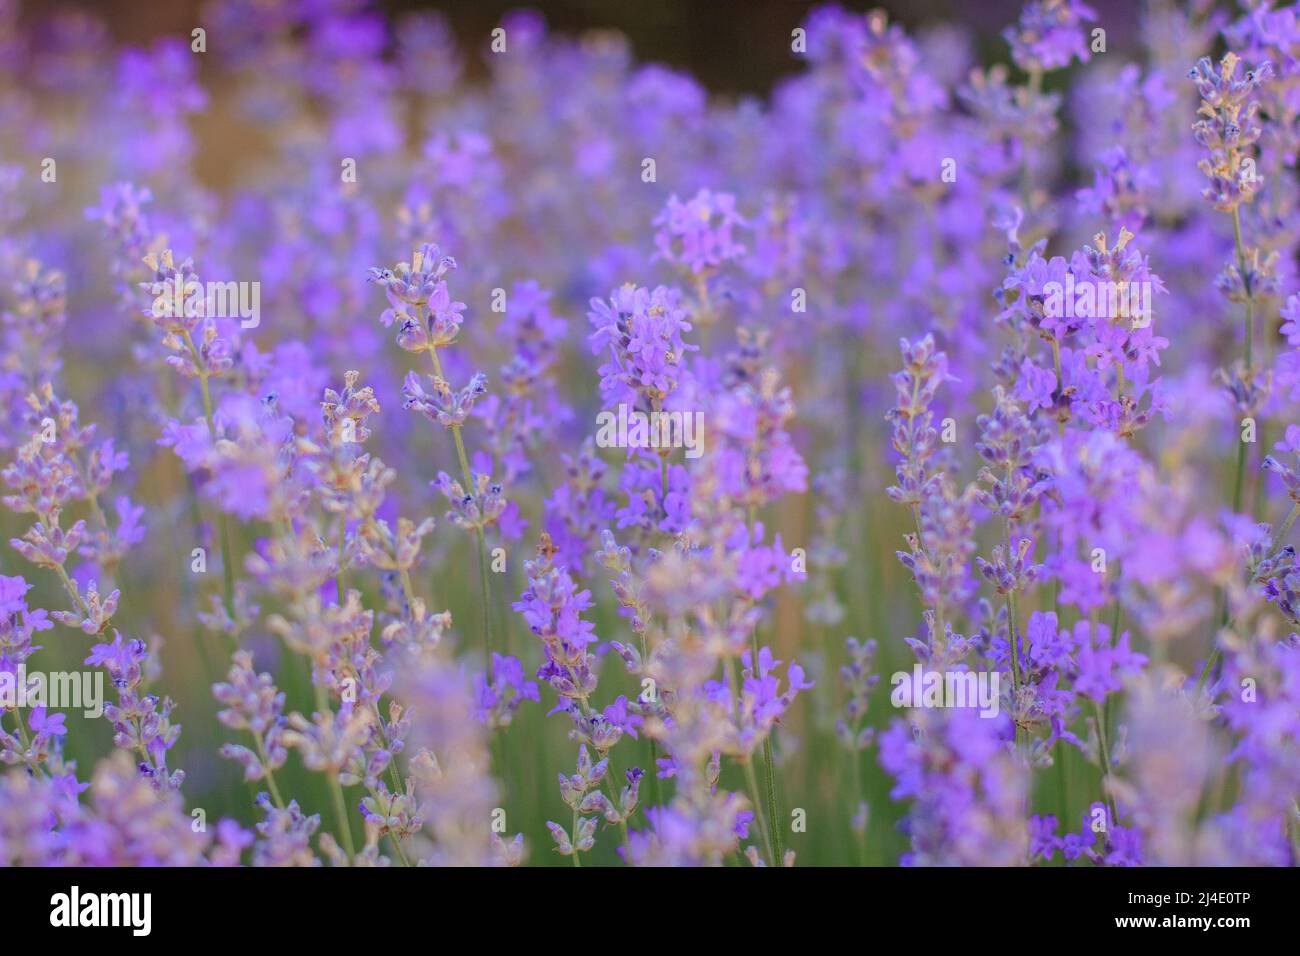 A beautiful violet bush of blossoming lavender close-up Stock Photo